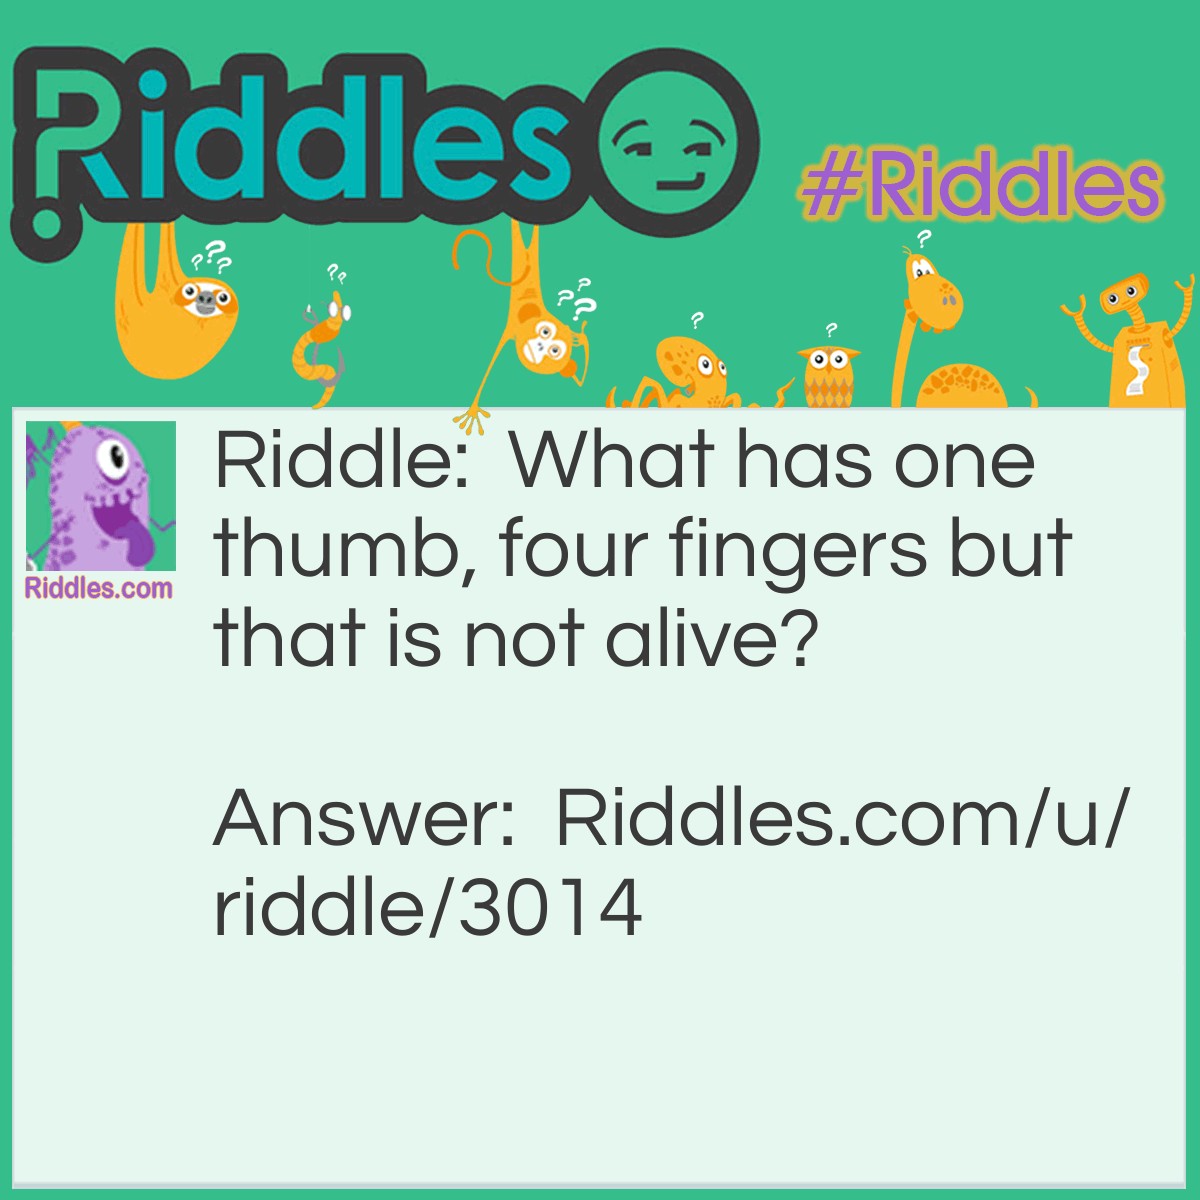 Riddle: What has one thumb, four fingers but that is not alive? Answer: A glove.